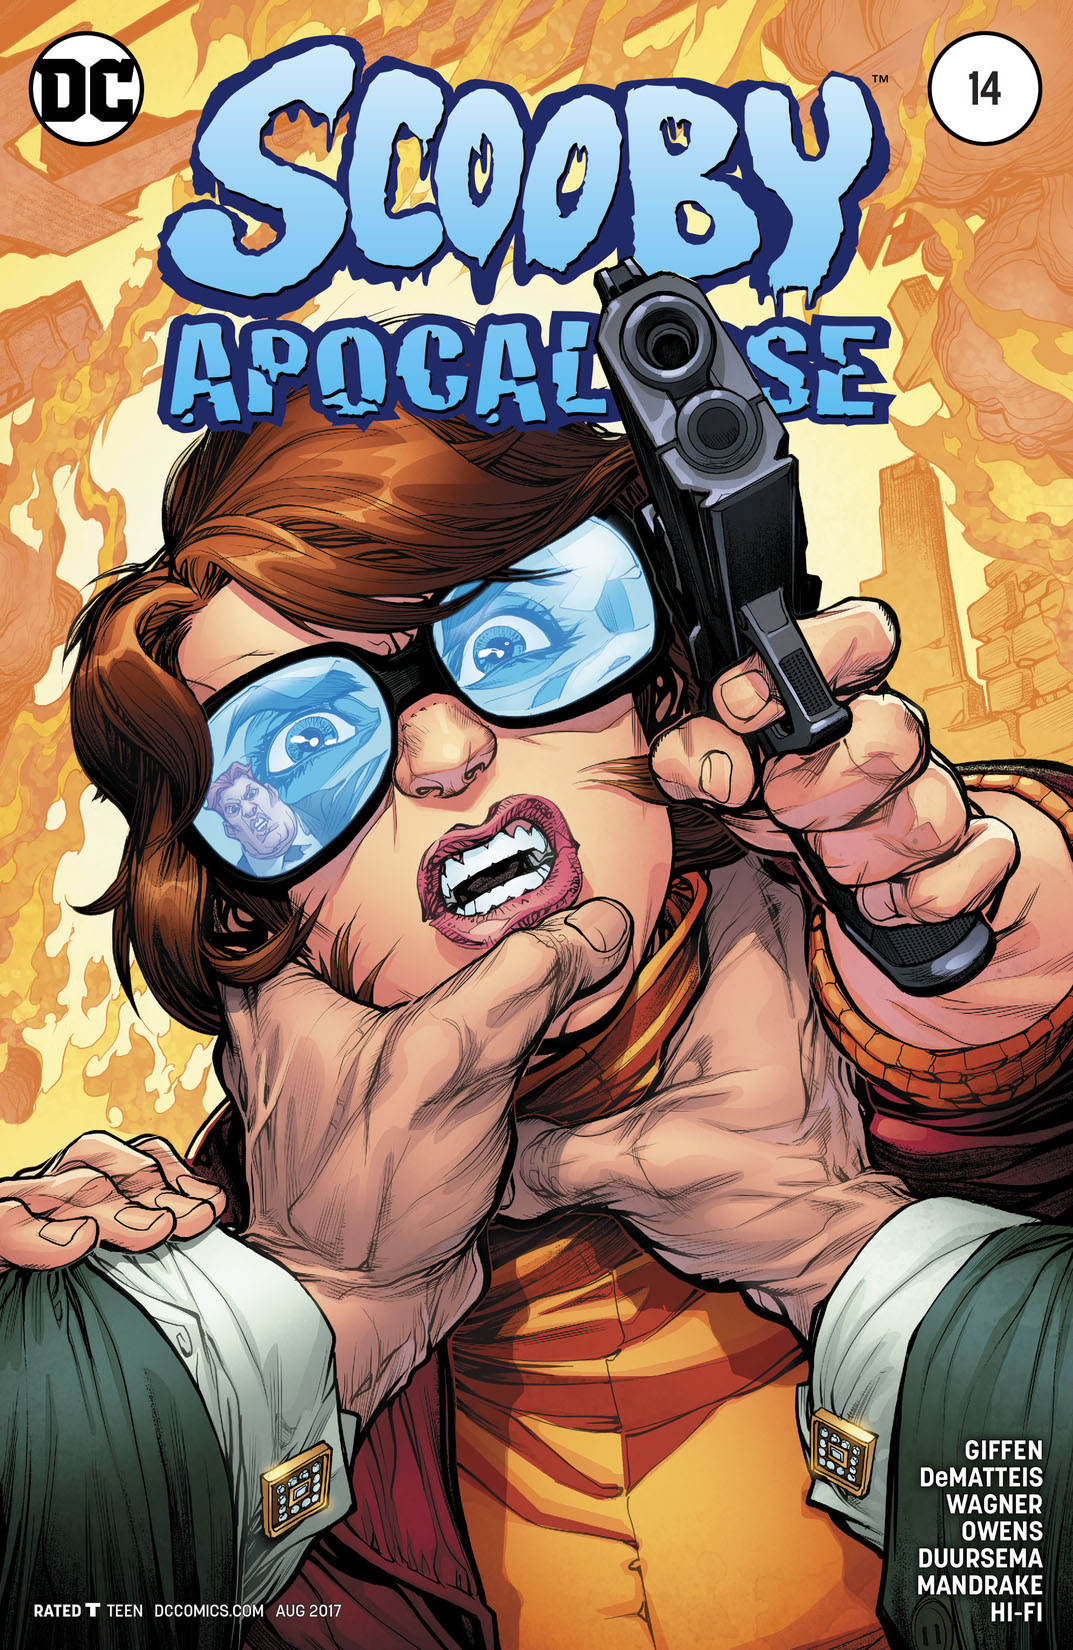 Scooby Apocalypse #14 preview images